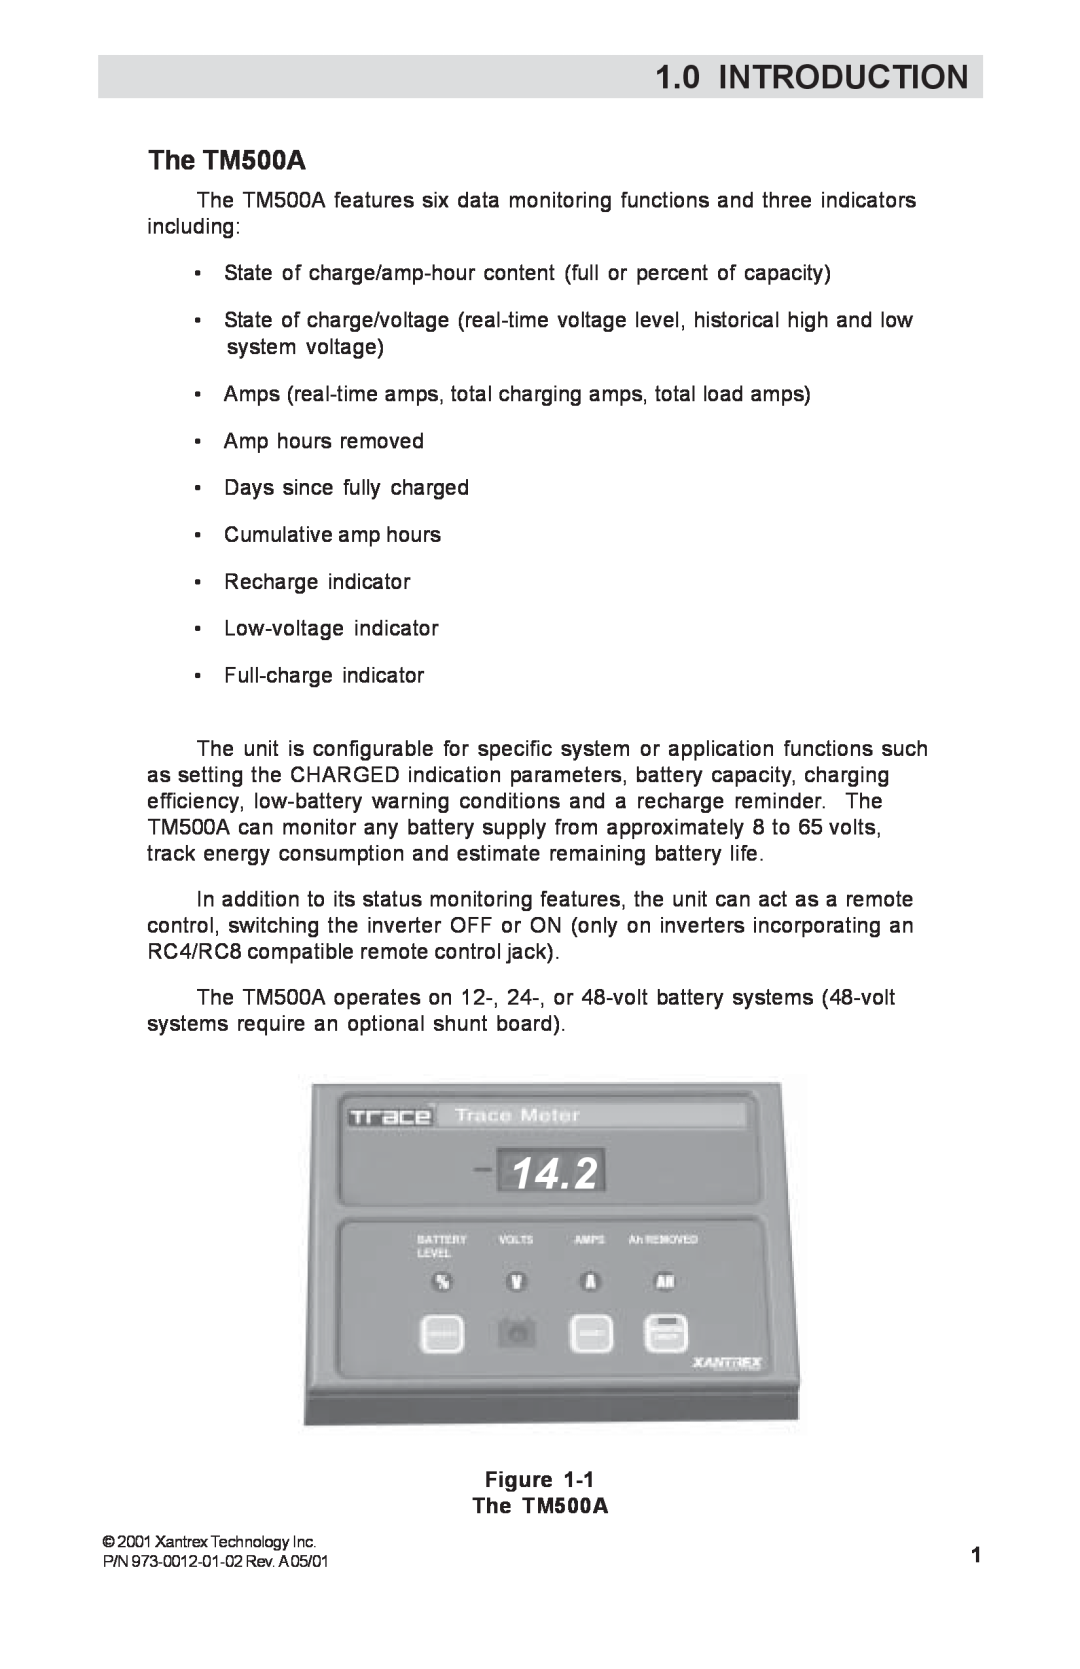 Xantrex Technology manual Introduction, The TM500A, 14.2 